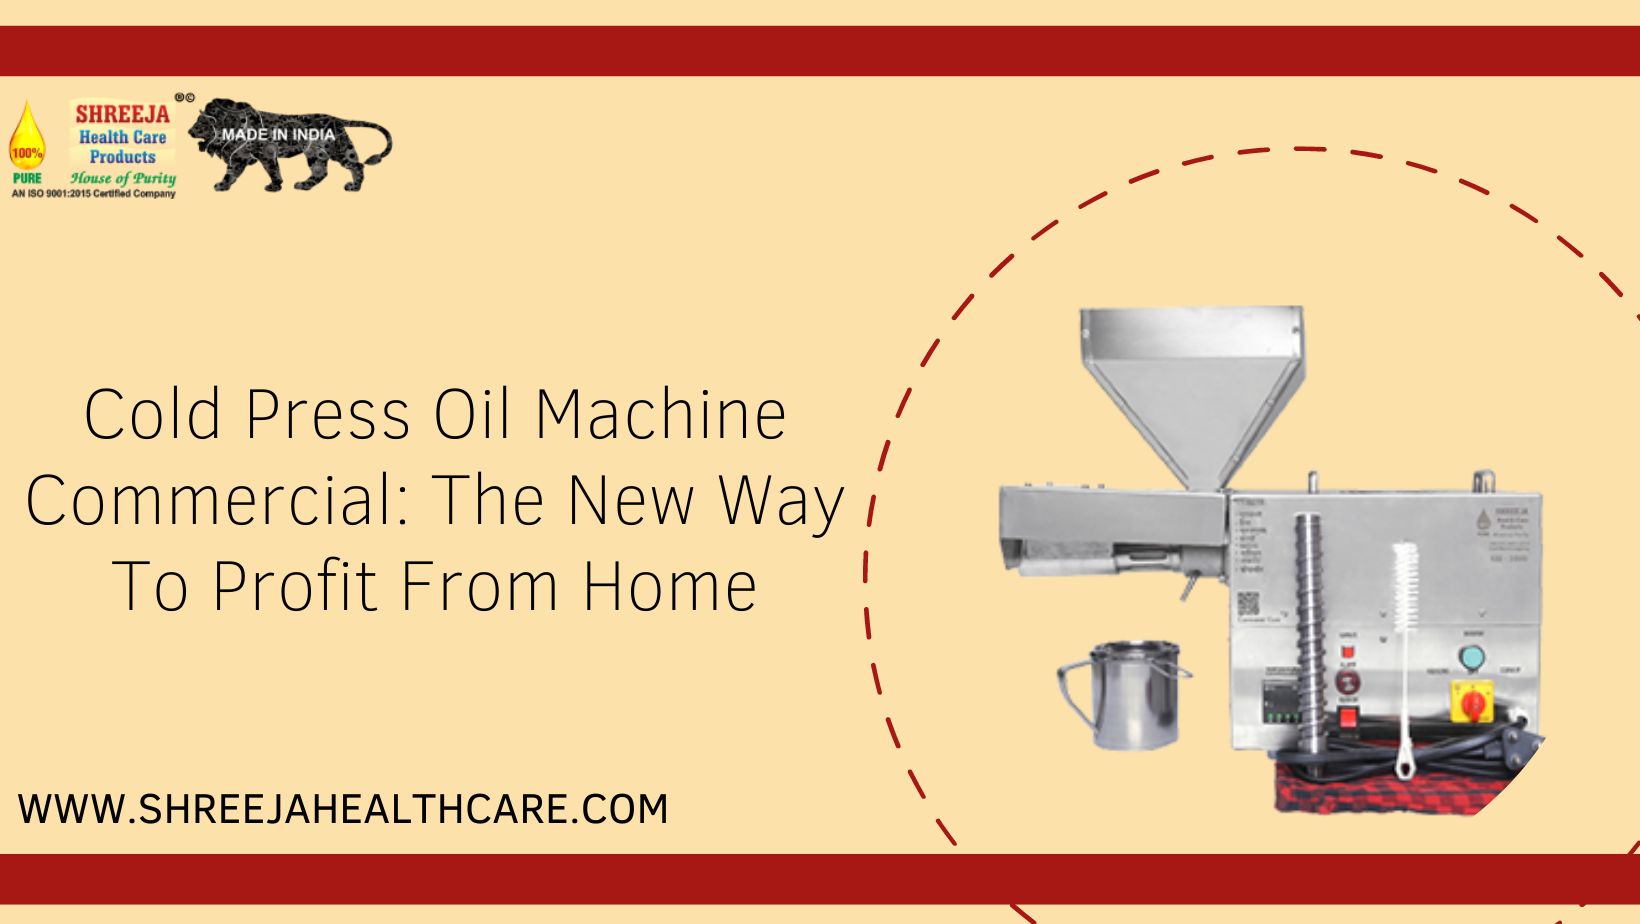 Cold Press Oil Machine Commercial: The New Way To Profit From Home